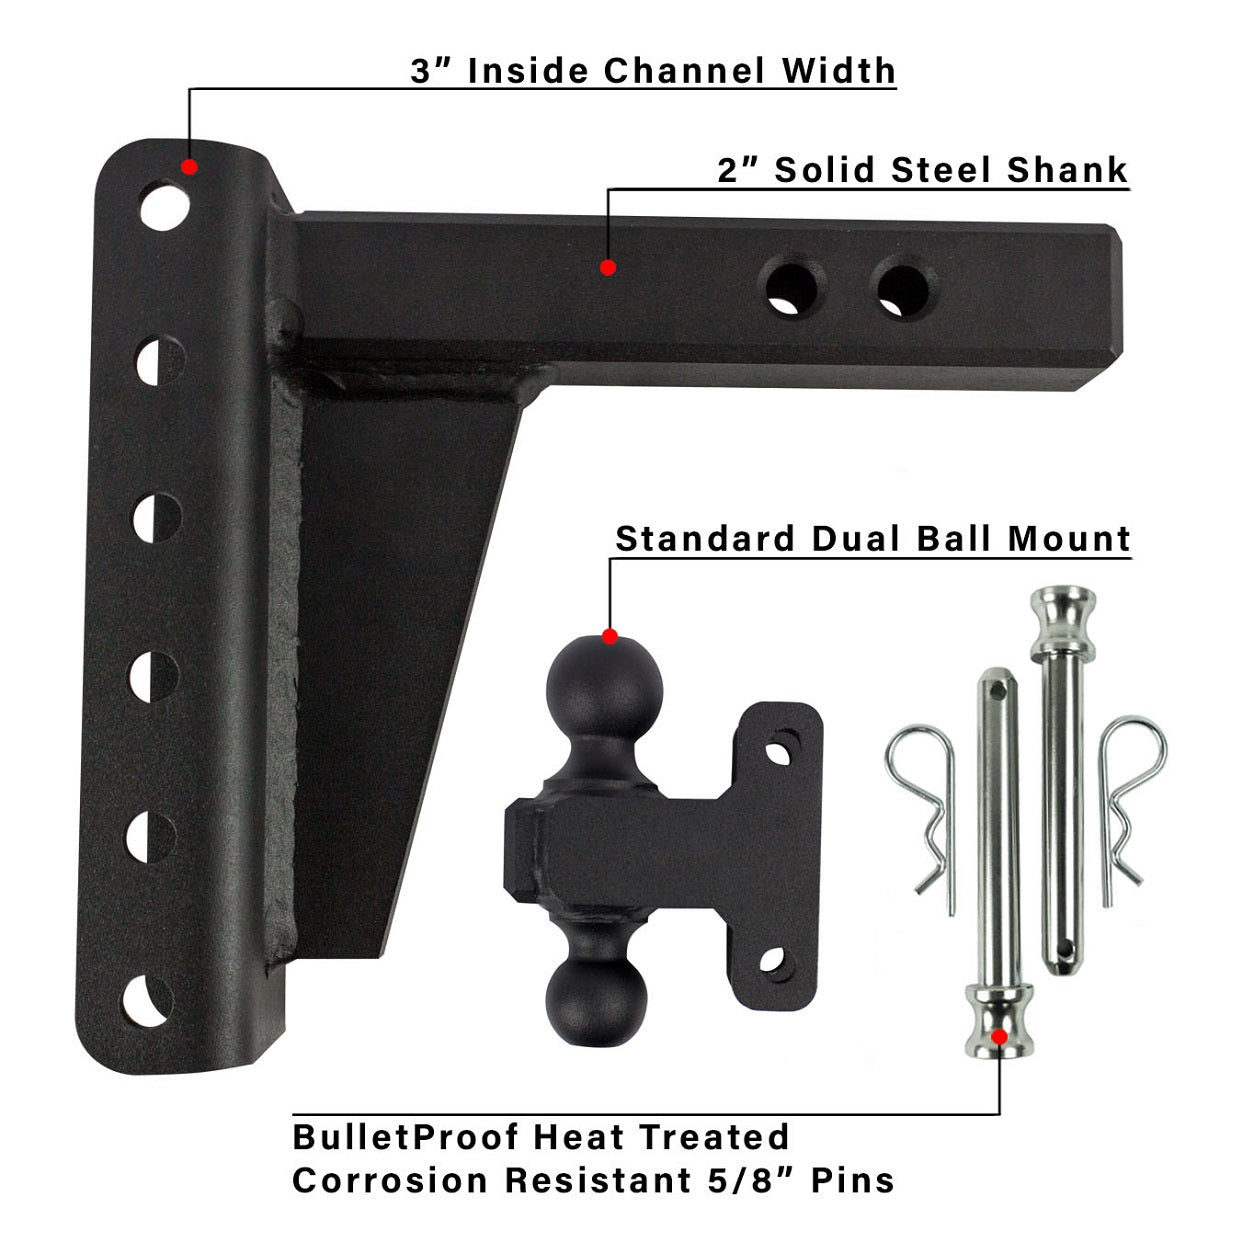 2.0" Heavy Duty 6" Drop/Rise Hitch Included Parts